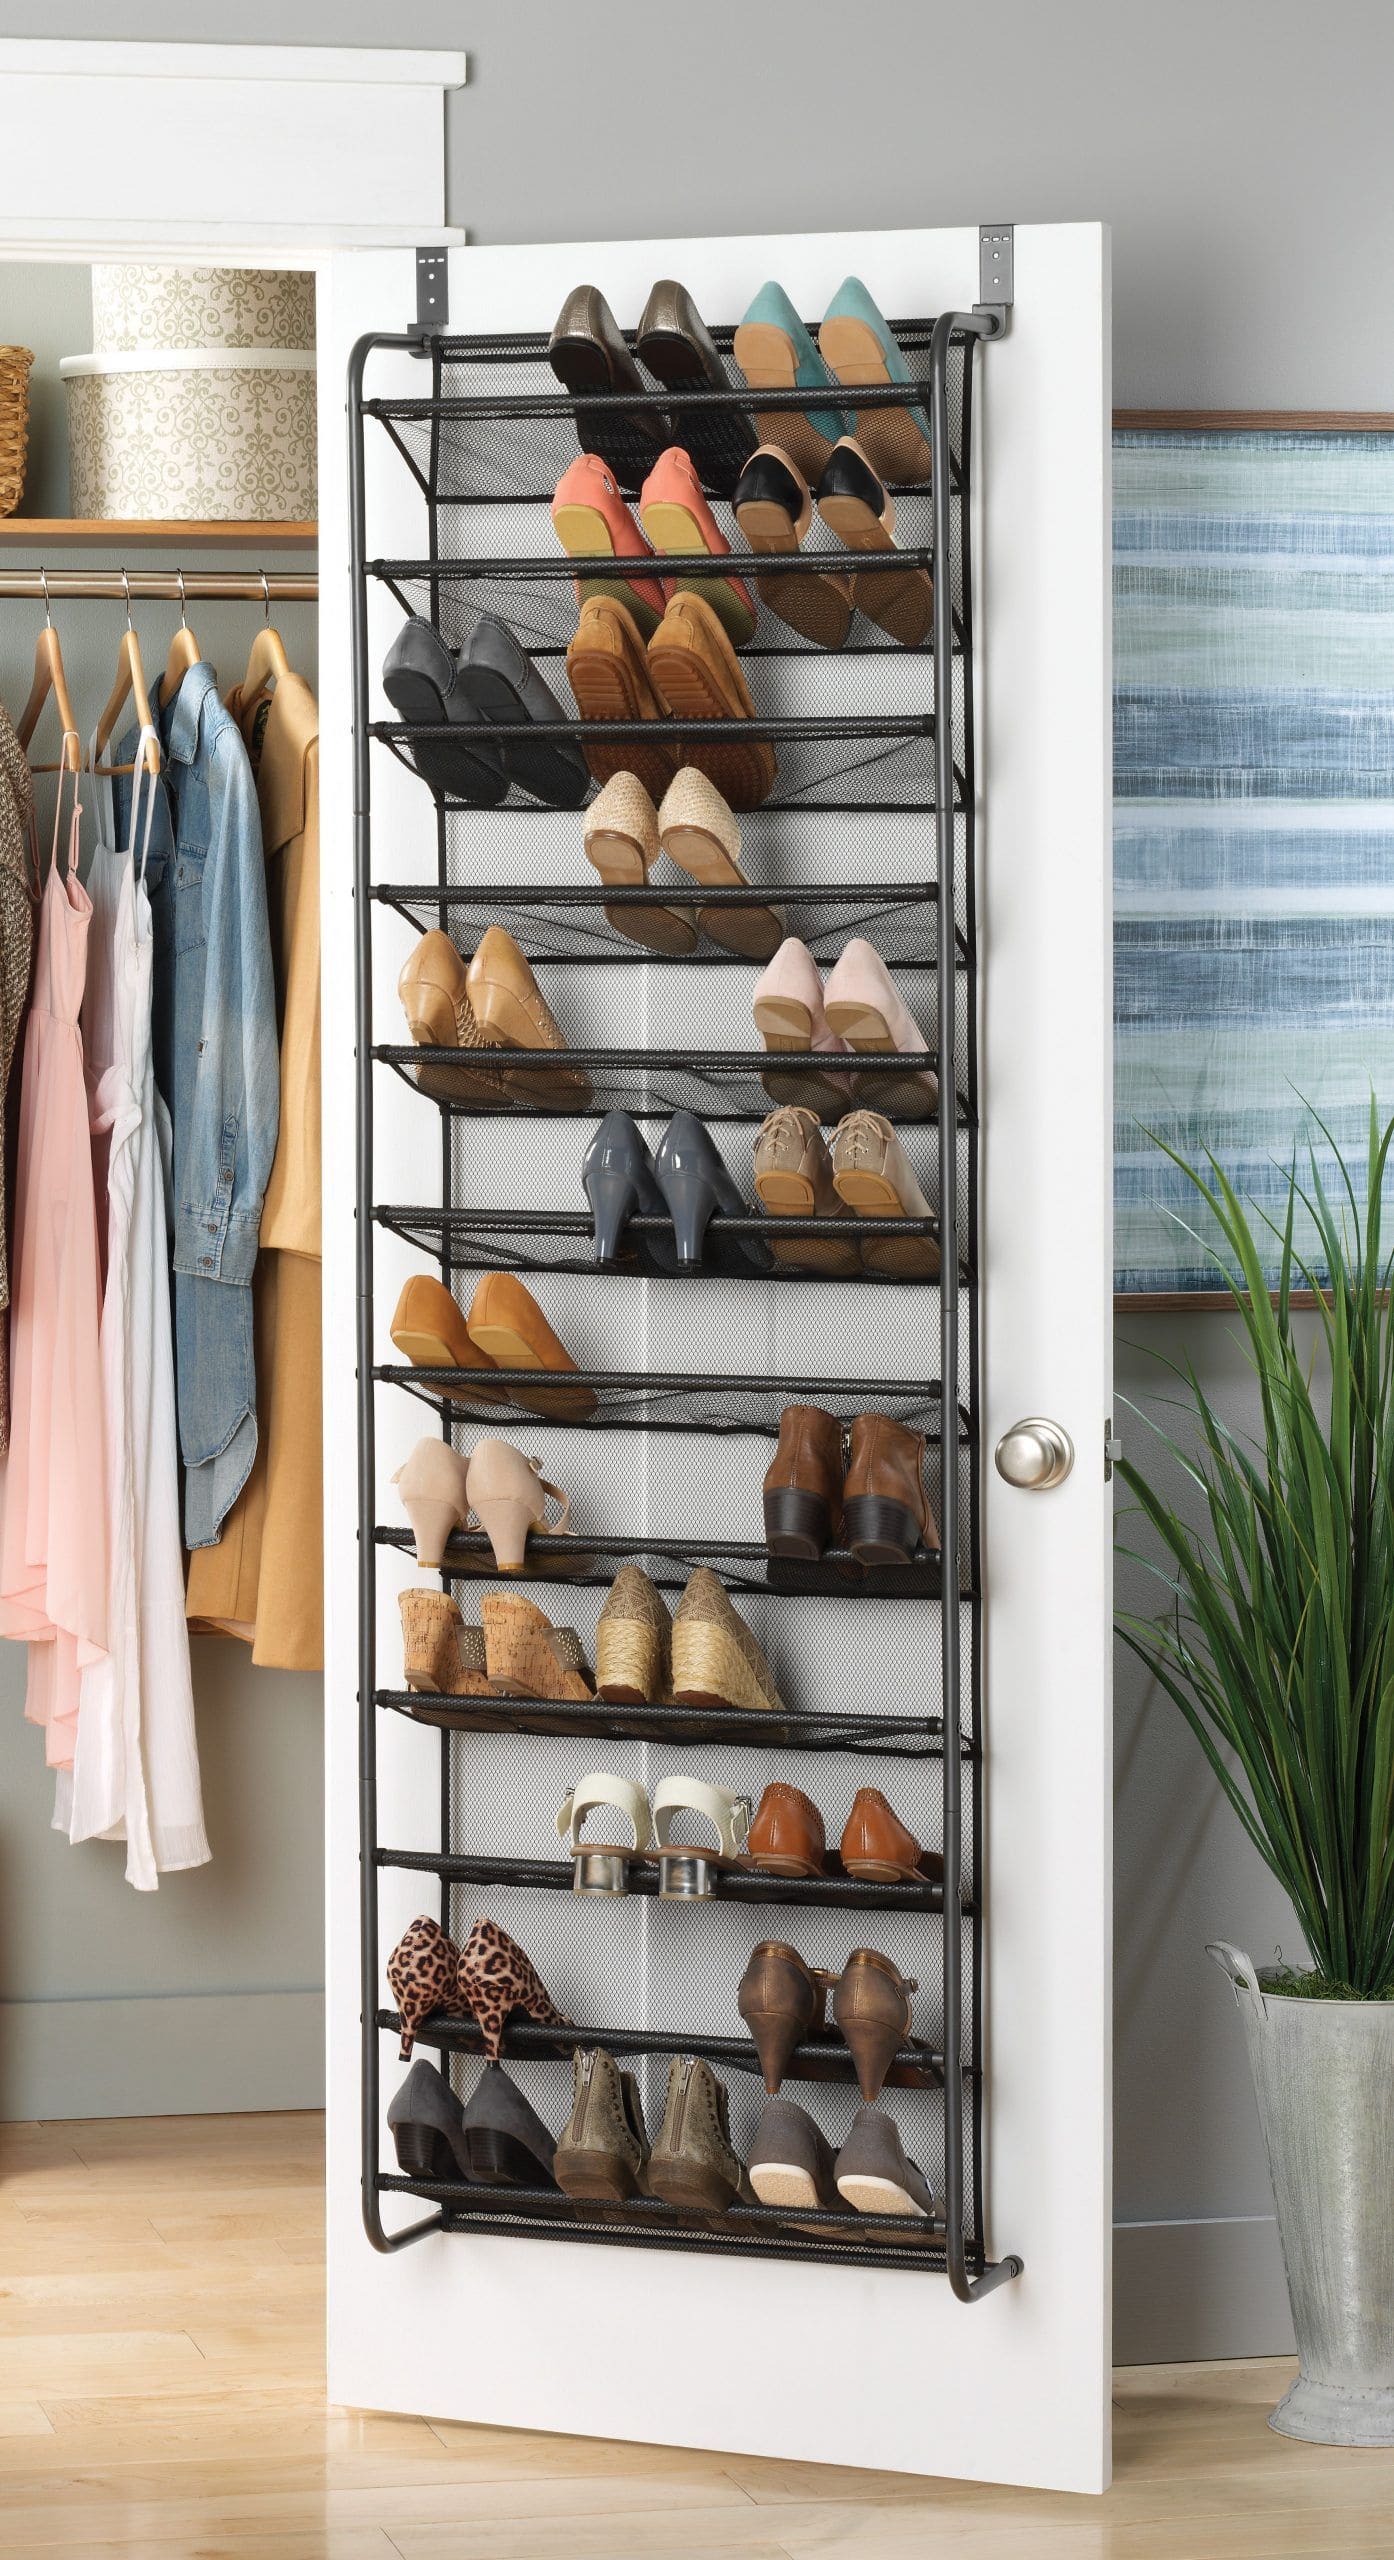 20 fascinating over the door storage ideas to put in your bag - 139